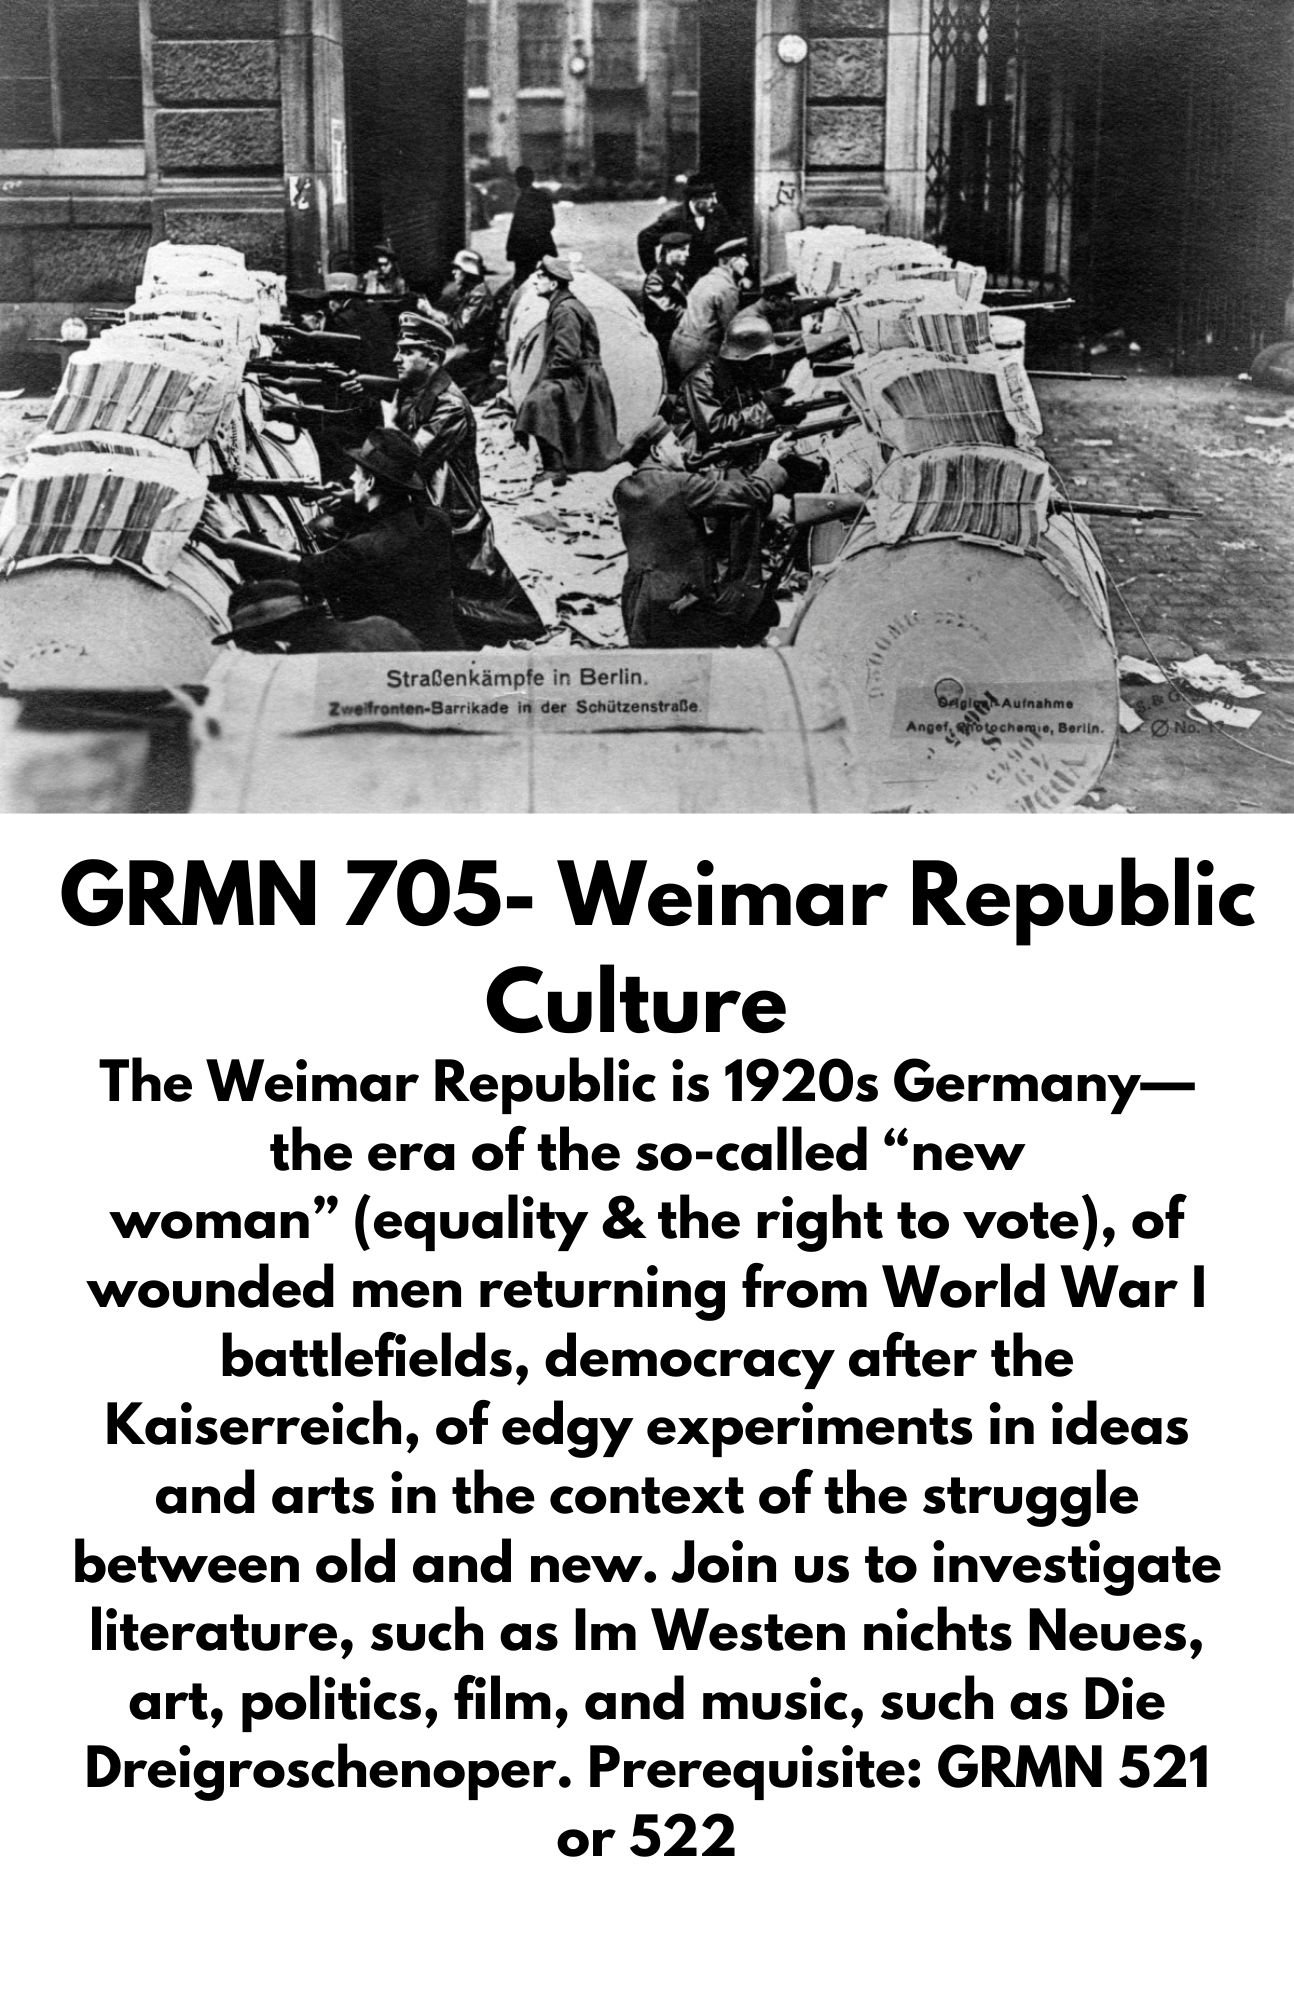 The Weimar Republic is 1920s Germany—the era of the so-called “new woman” (equality & the right to vote), of wounded men returning from World War I battlefields, democracy after the Kaiserreich, of edgy experiments in ideas and arts in the context of the struggle between old and new. Join us to investigate literature, such as Im Westen nichts Neues, art, politics, film, and music, such as Die Dreigroschenoper. Prerequisite: GRMN 521 or 522